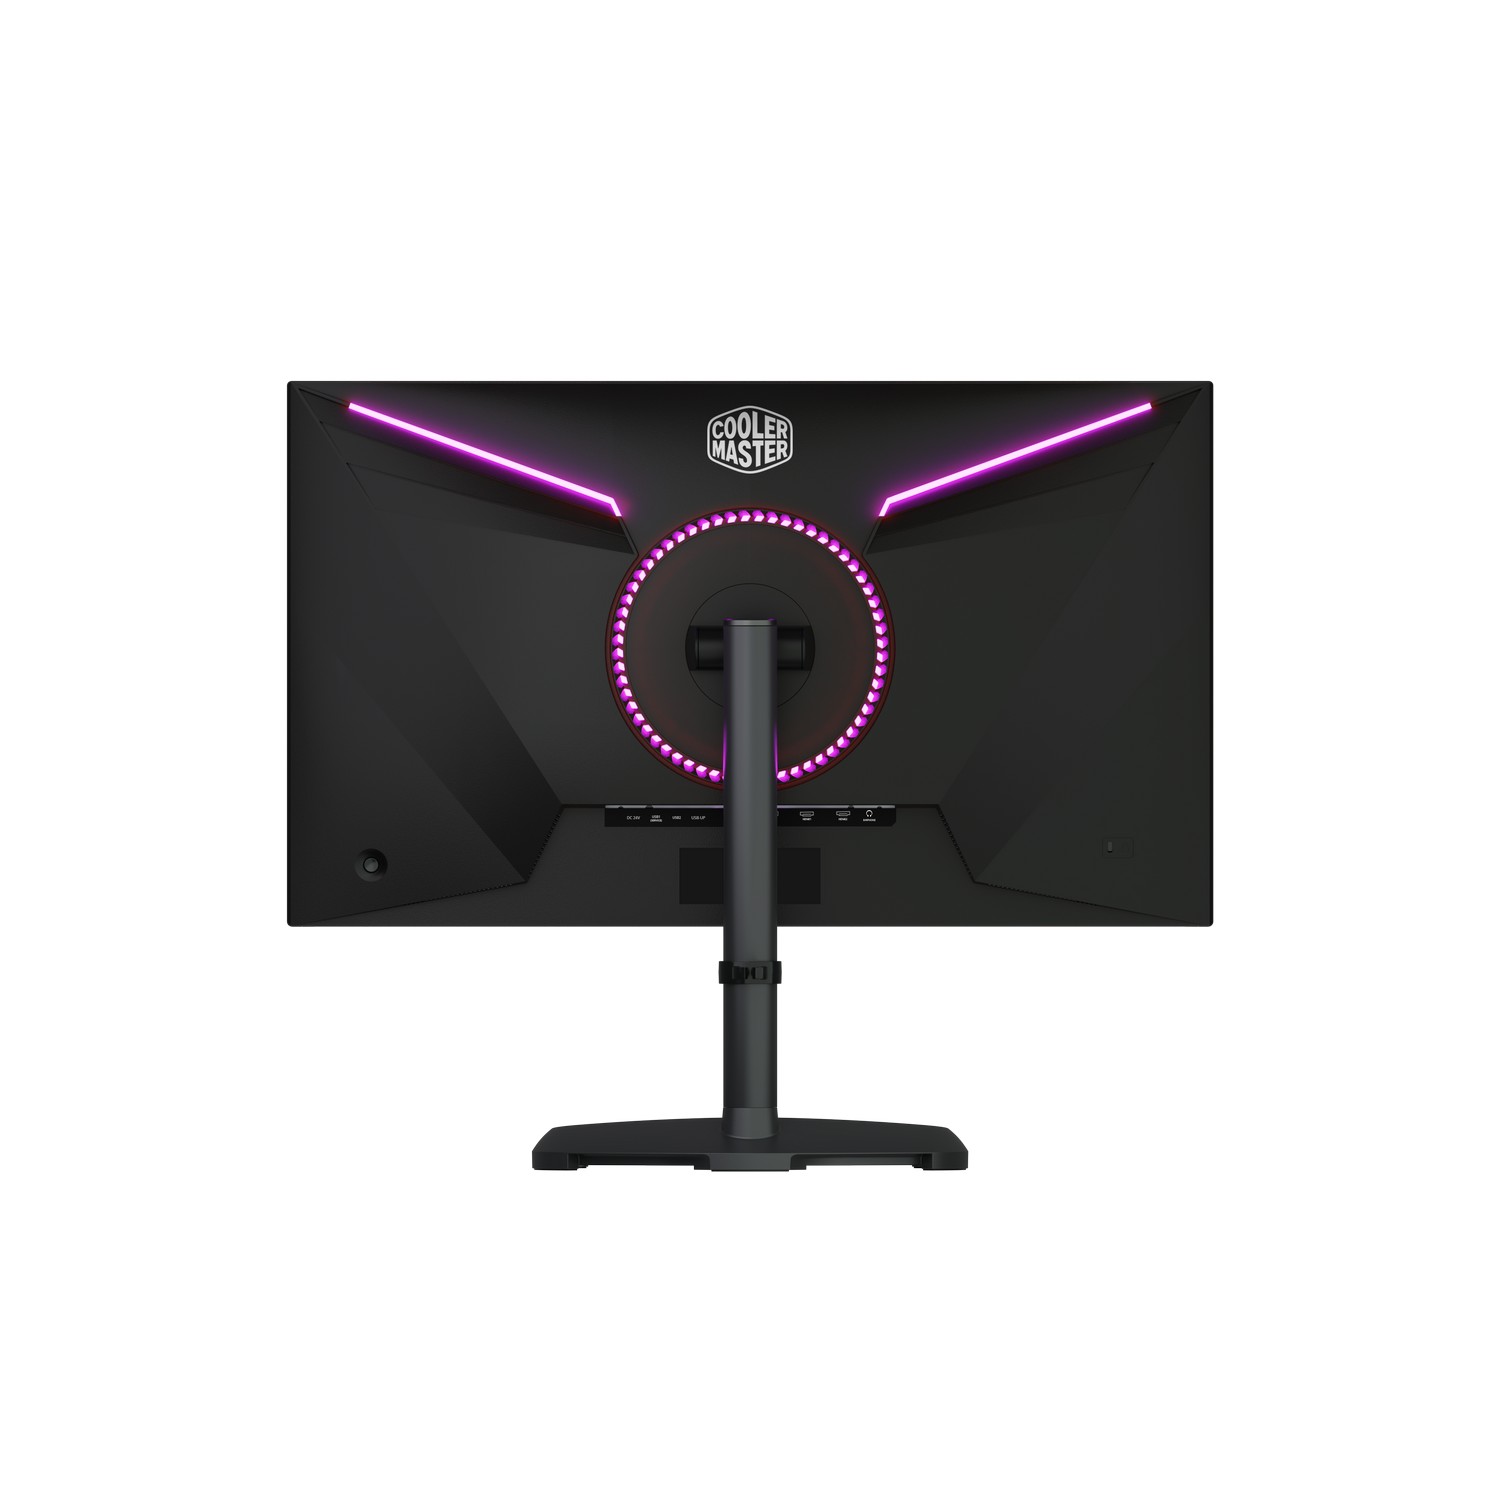 Cooler Master Tempest GP27U 27" 3840x2160 IPS 160Hz FreeSync HDR HDMI 2.1 Widescreen Gaming Monitor